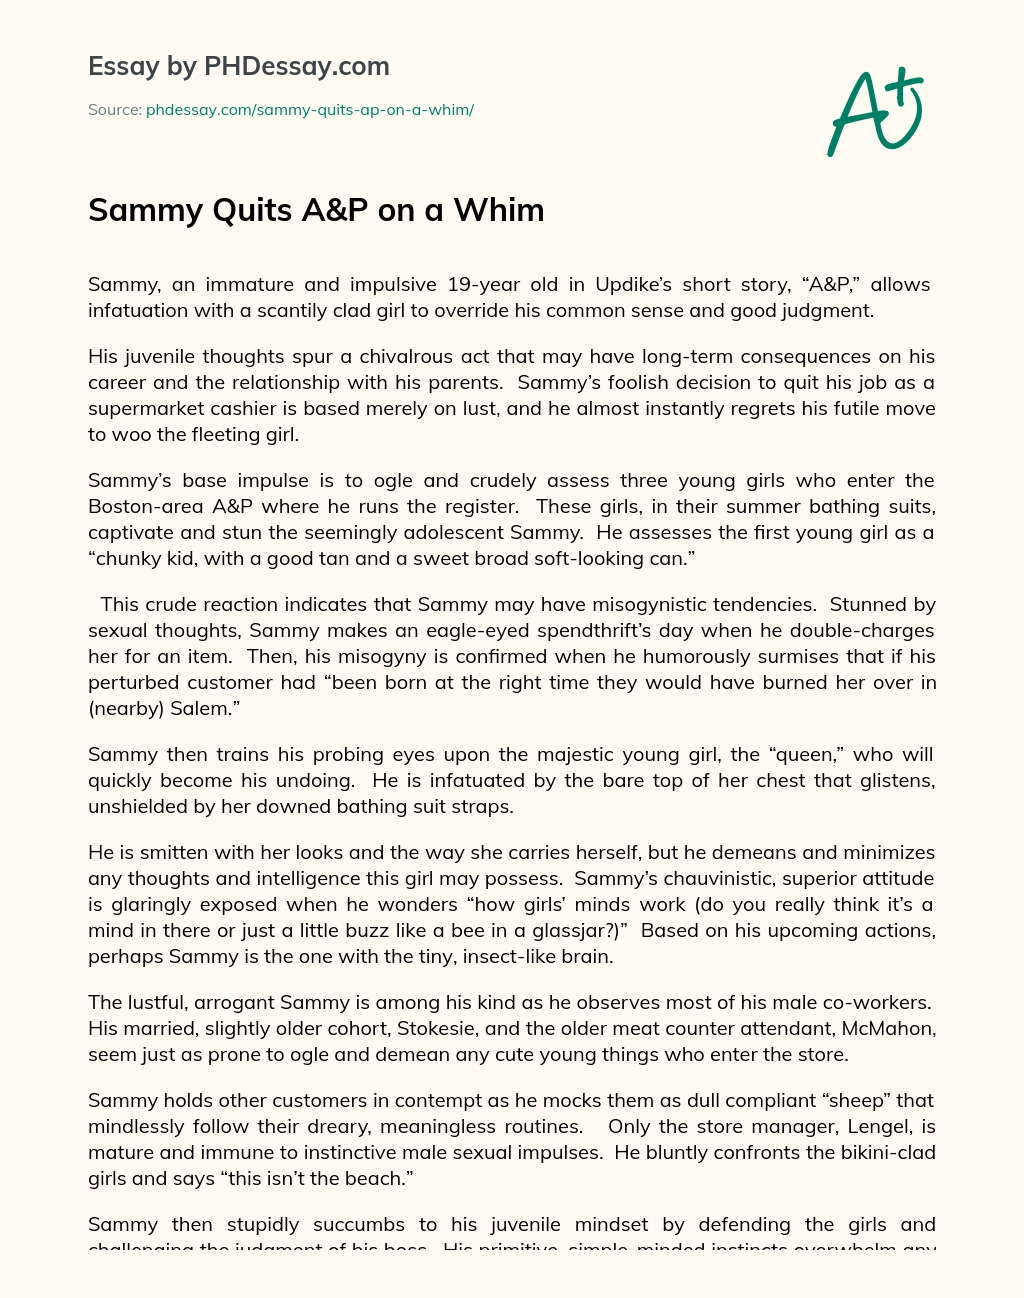 Sammy Quits A&P on a Whim essay